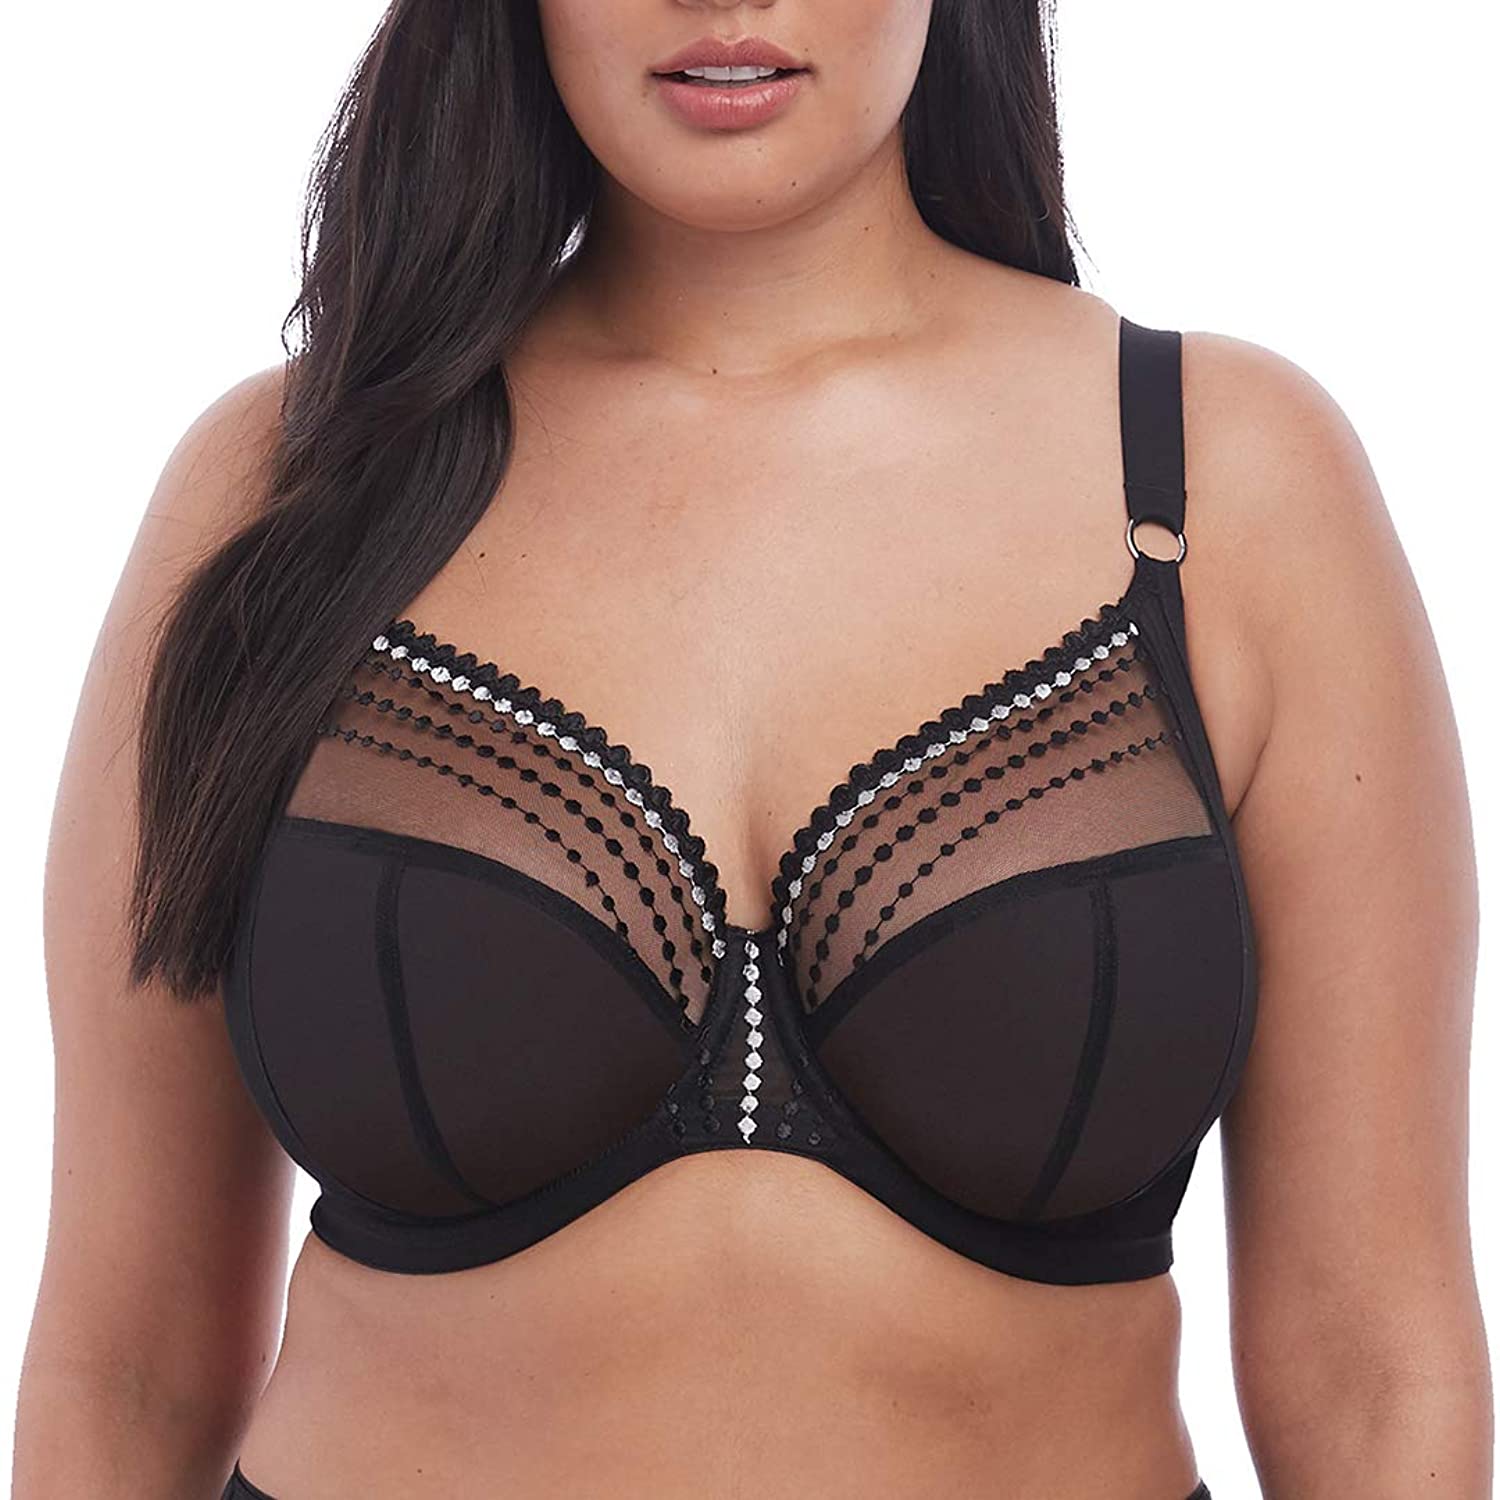 Best Support for Plus-Size Busts - Bra for Sagging Breasts